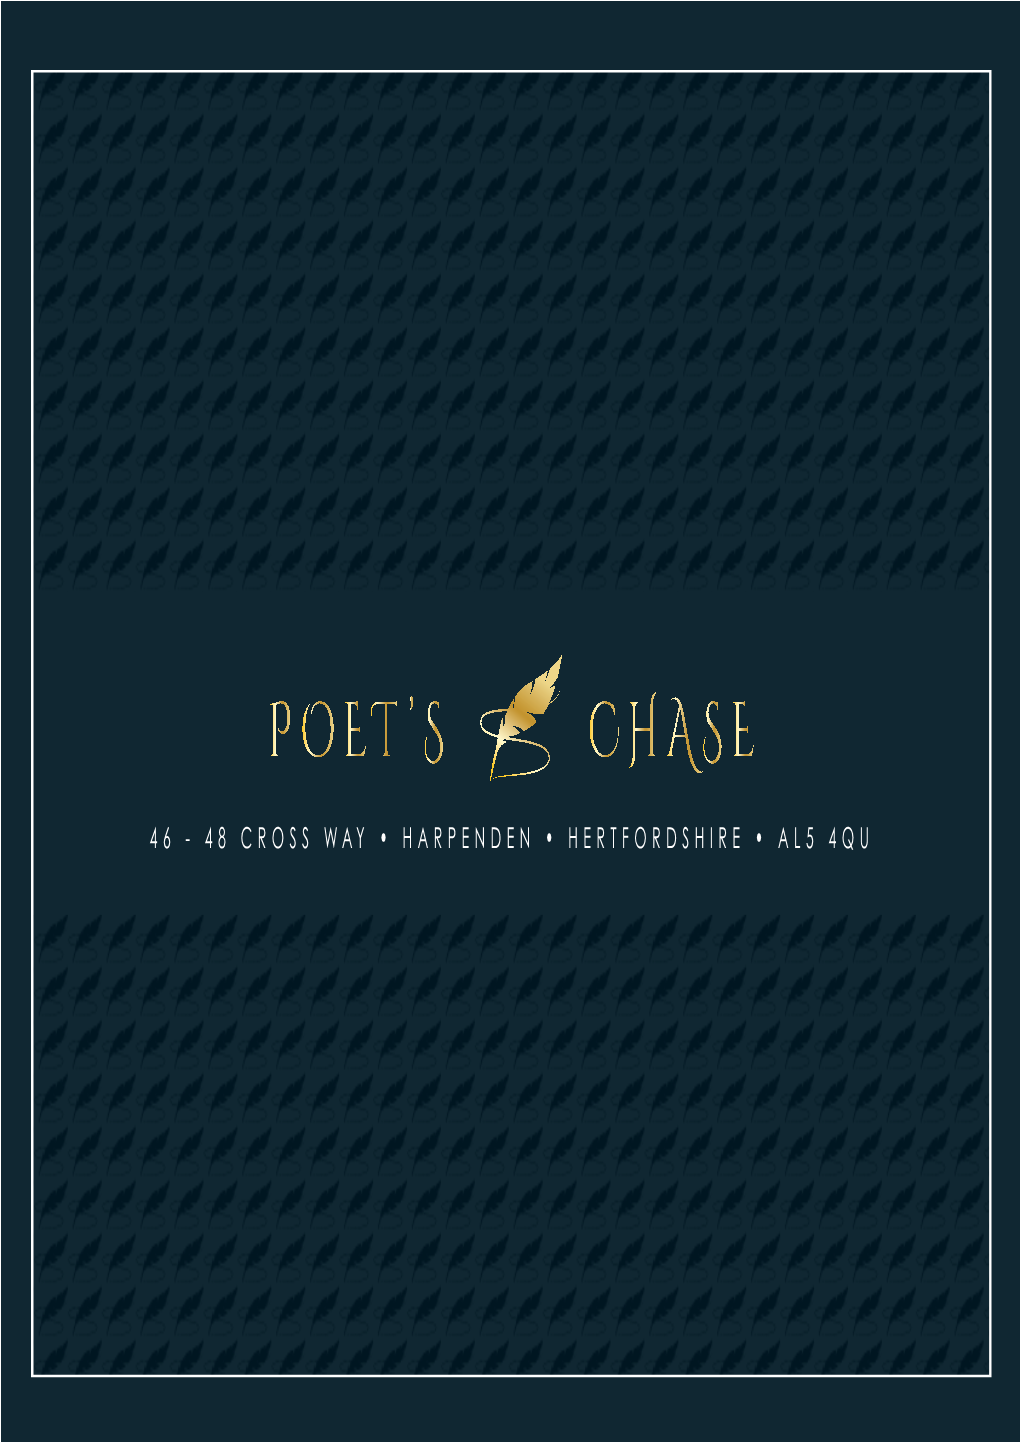 To Download the Poet's Chase Brochure